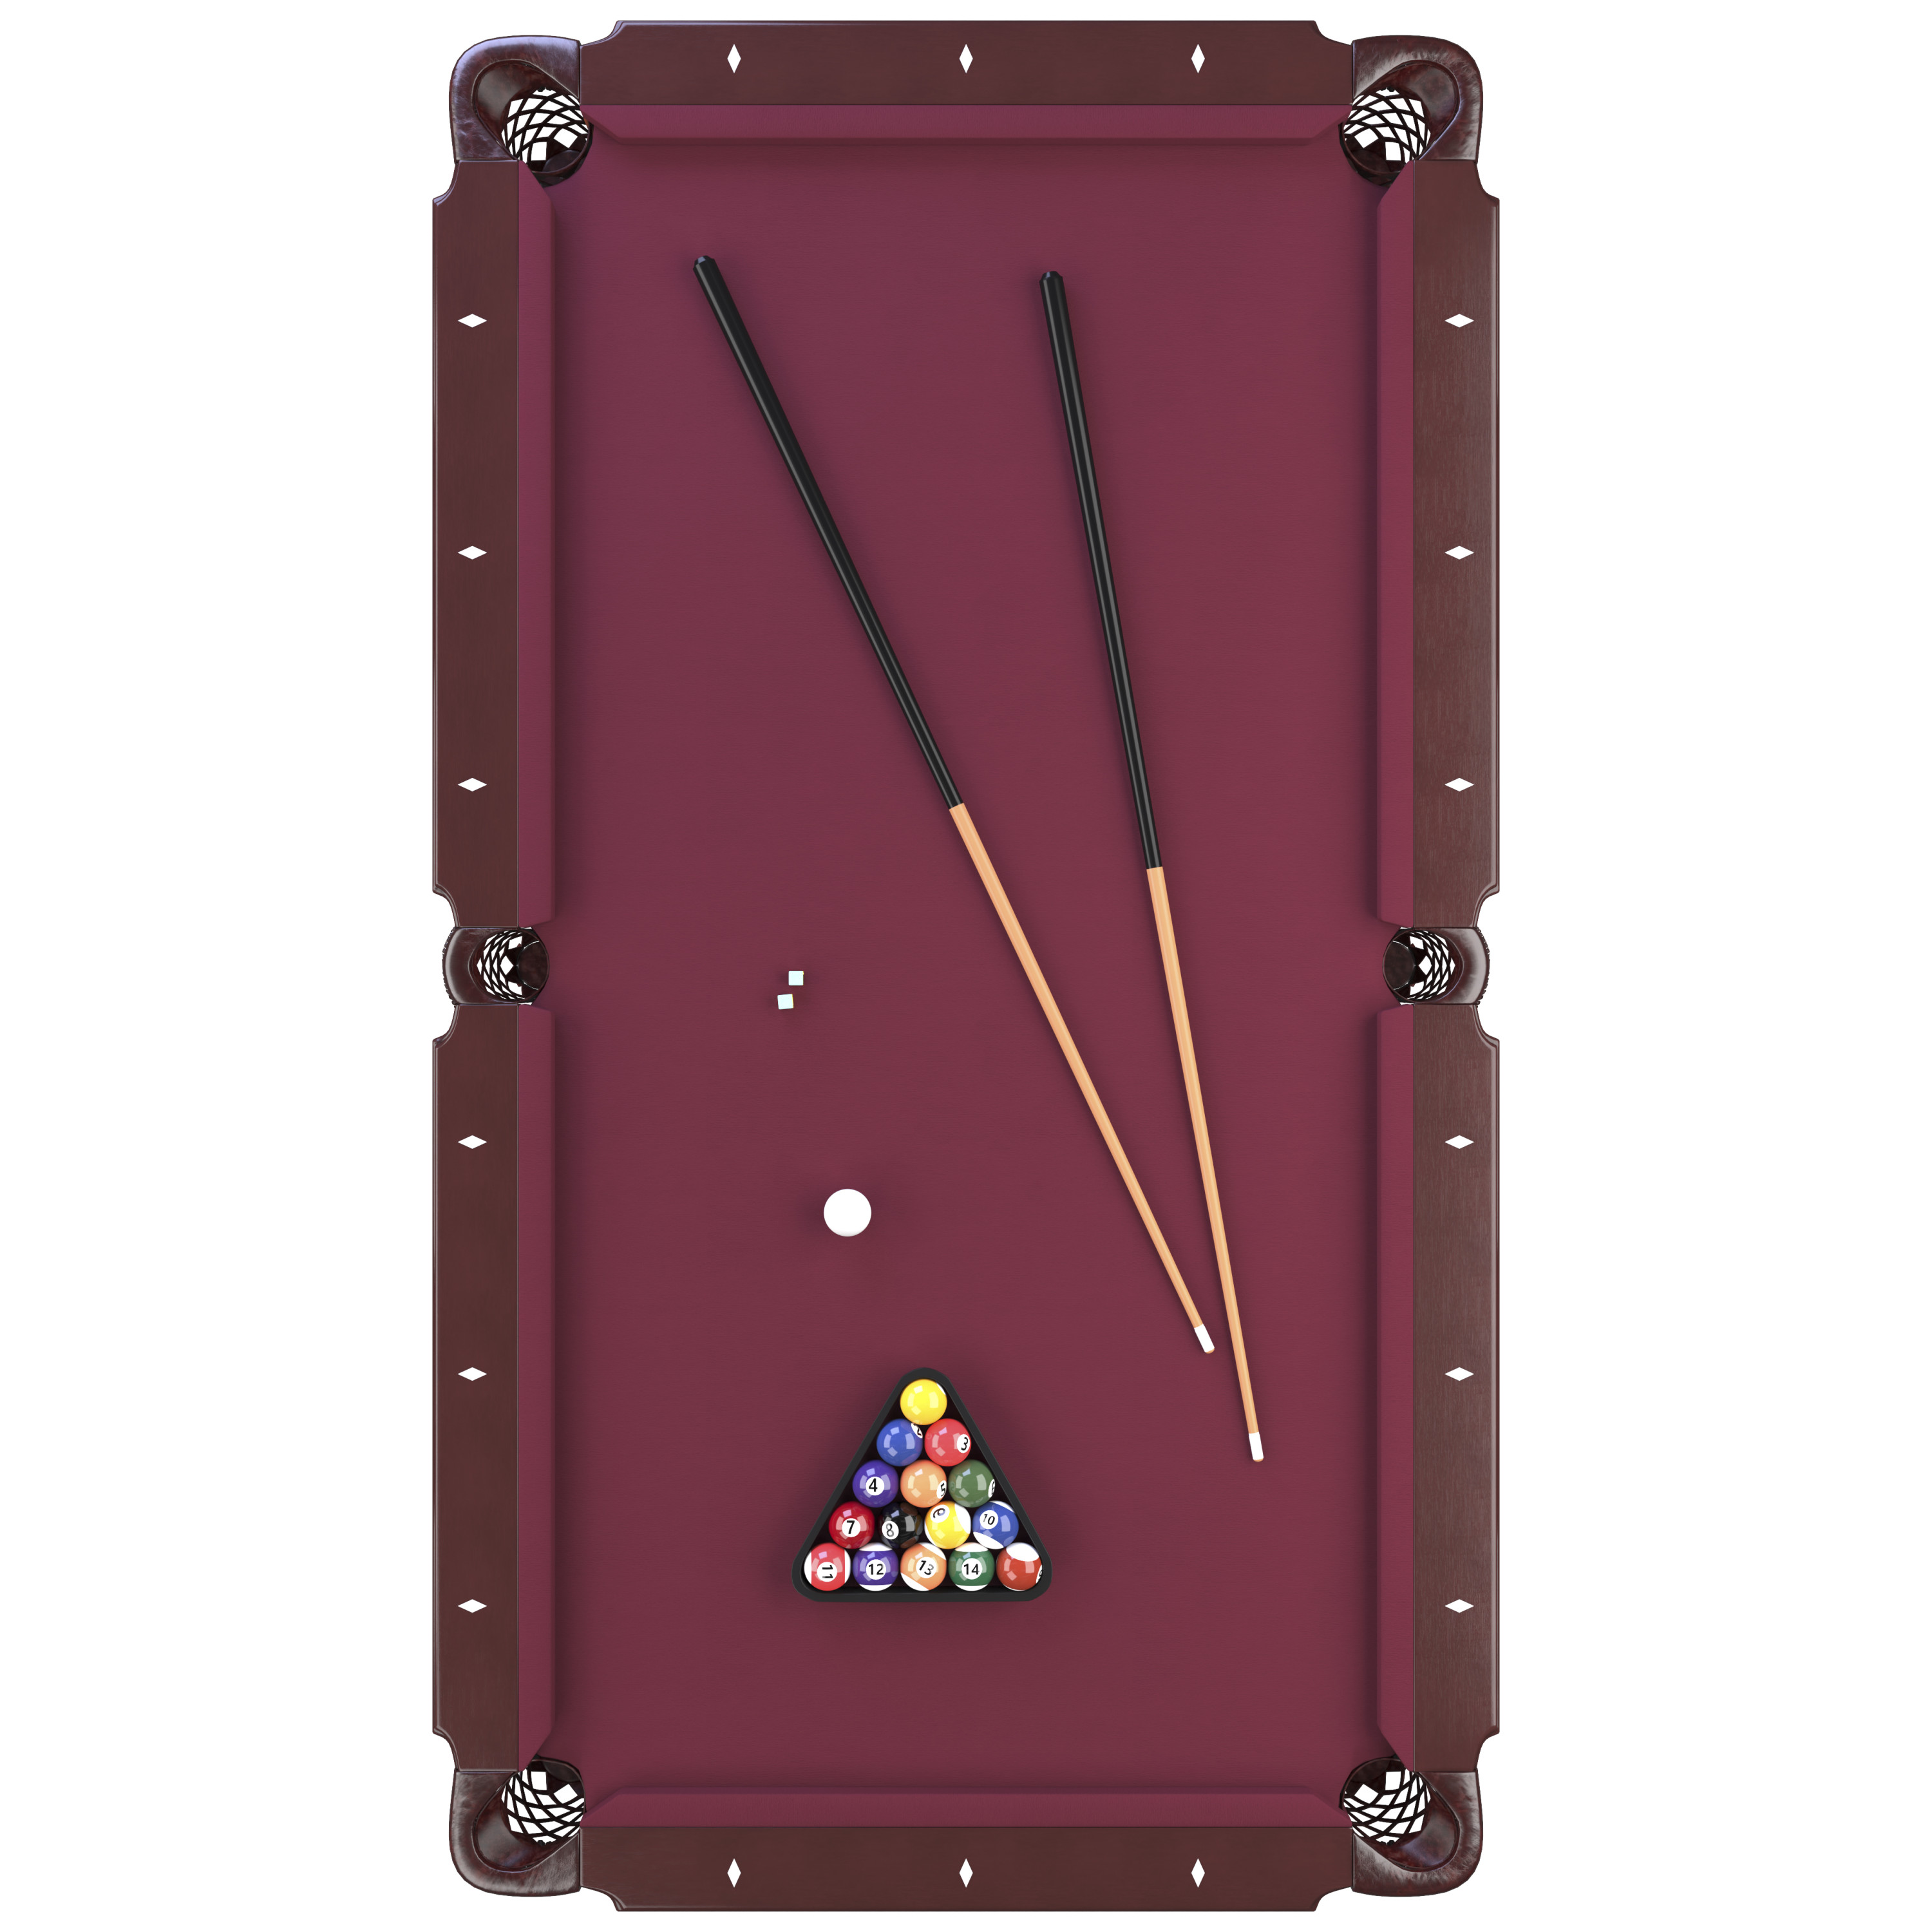 Fat Cat Reno 7.5' Pool Table with Pool Cues and Accessories - image 5 of 13